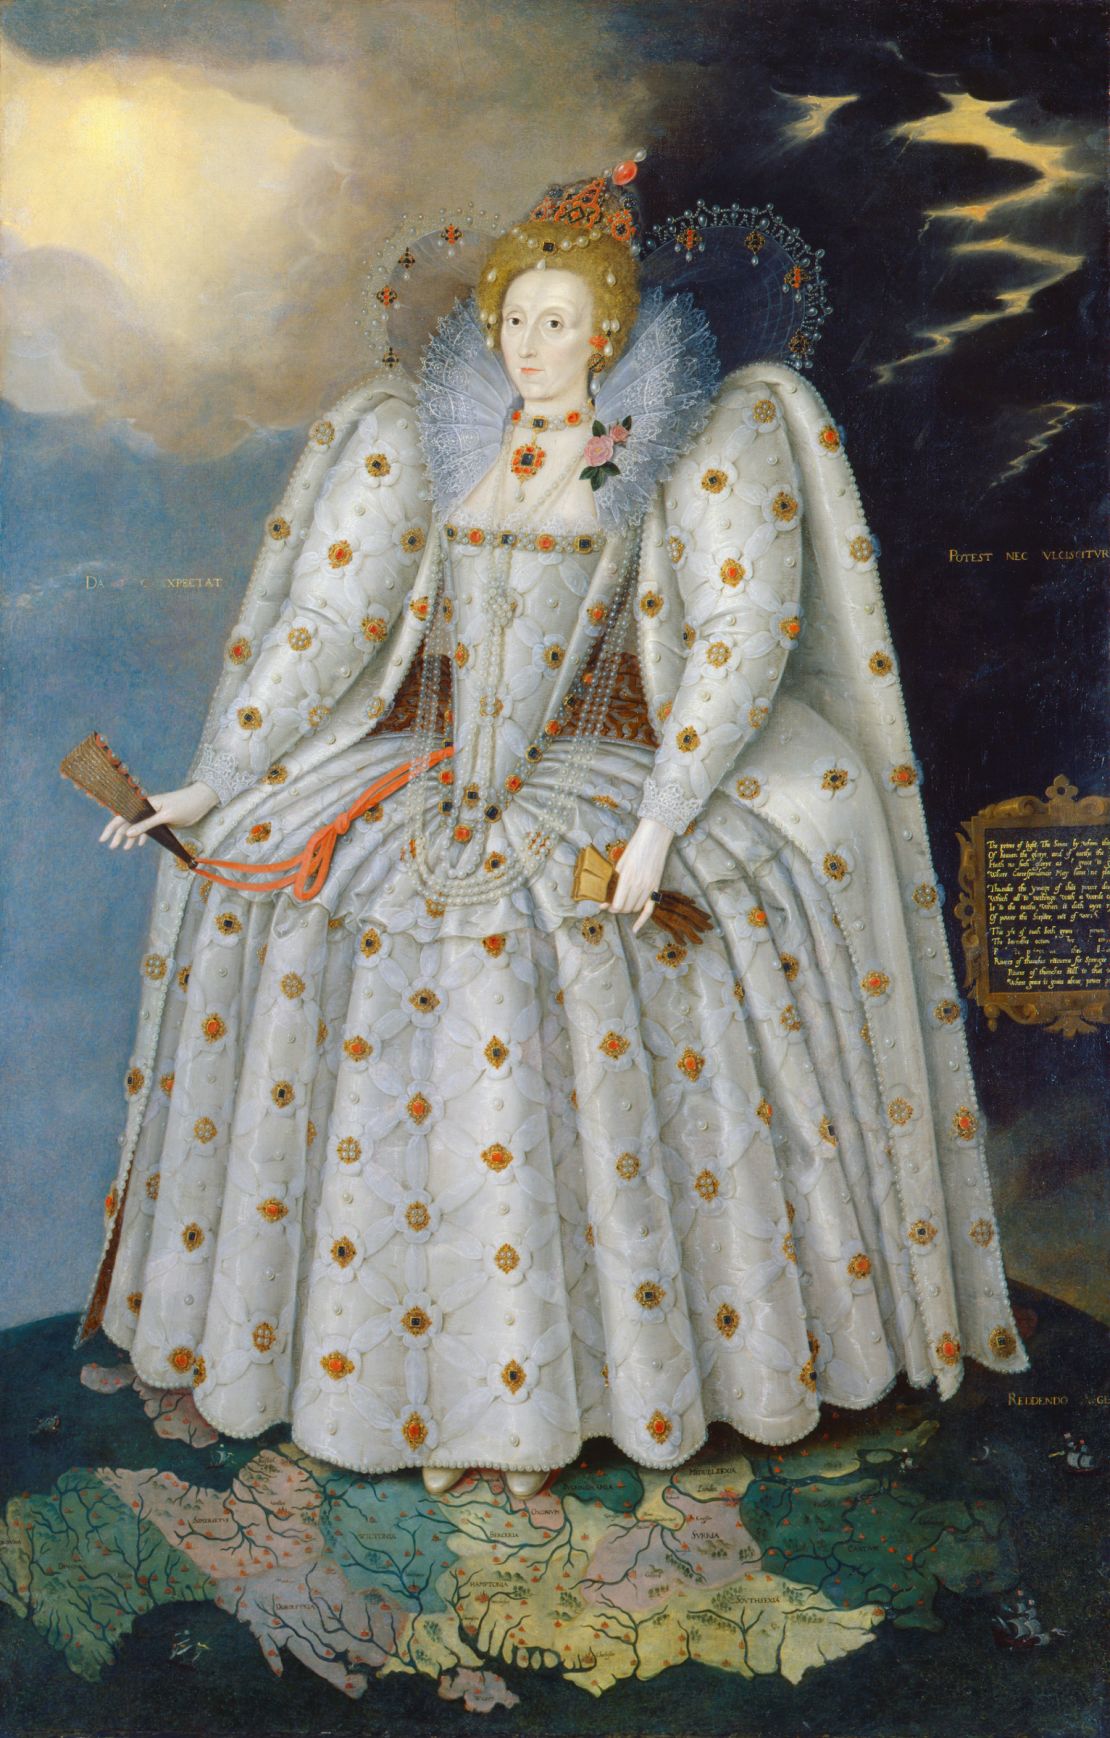 A 1592 portrait of Queen Elizabeth I by Marcus Gheeraerts the Younger.